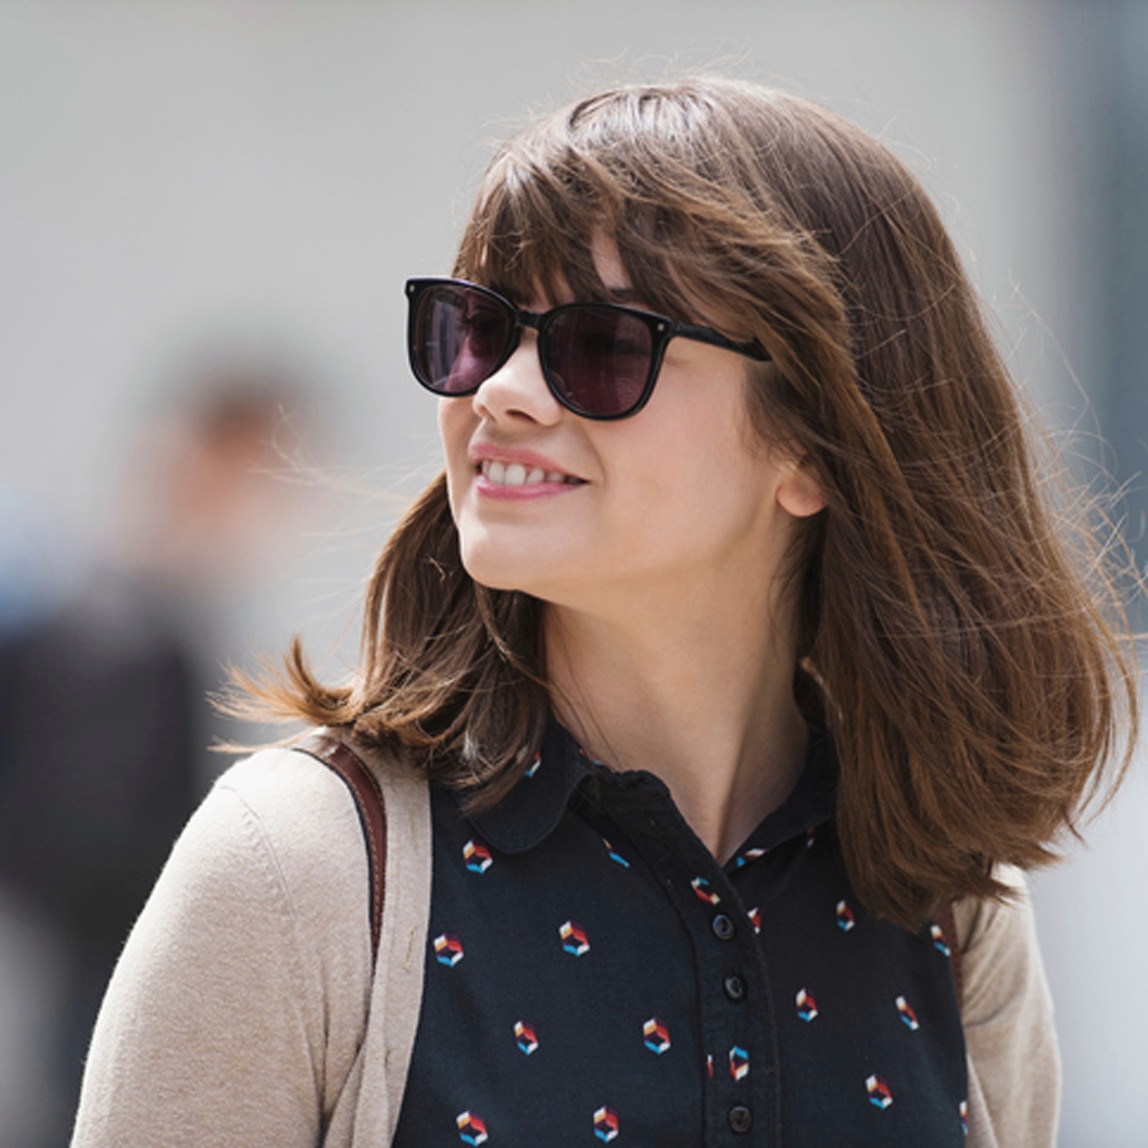 A woman with smooth hair, smiling and wearing sunglasses.